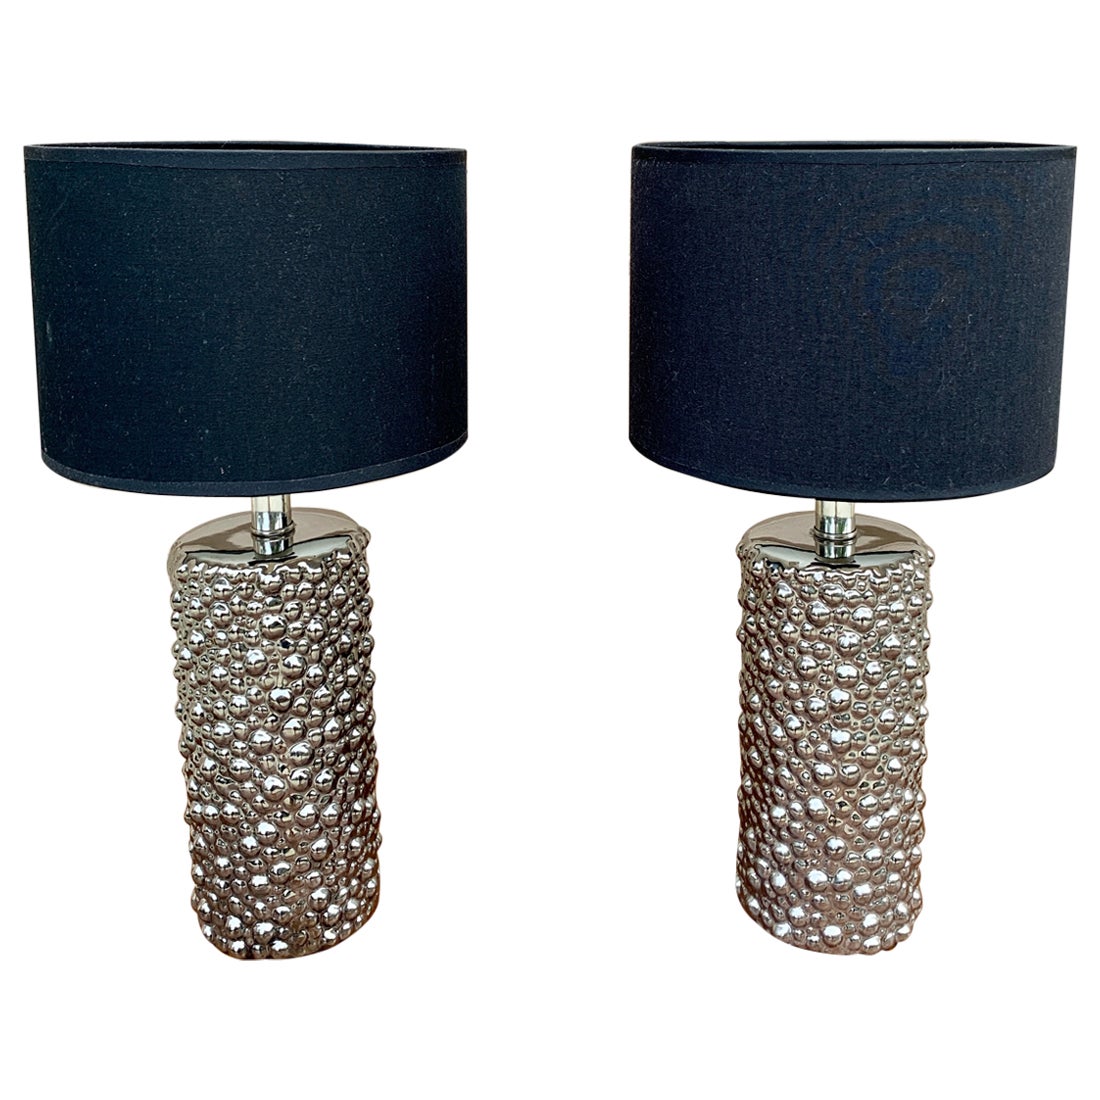 Contemporary Chrome Table Lamps with Black Drum Shades, Pair For Sale